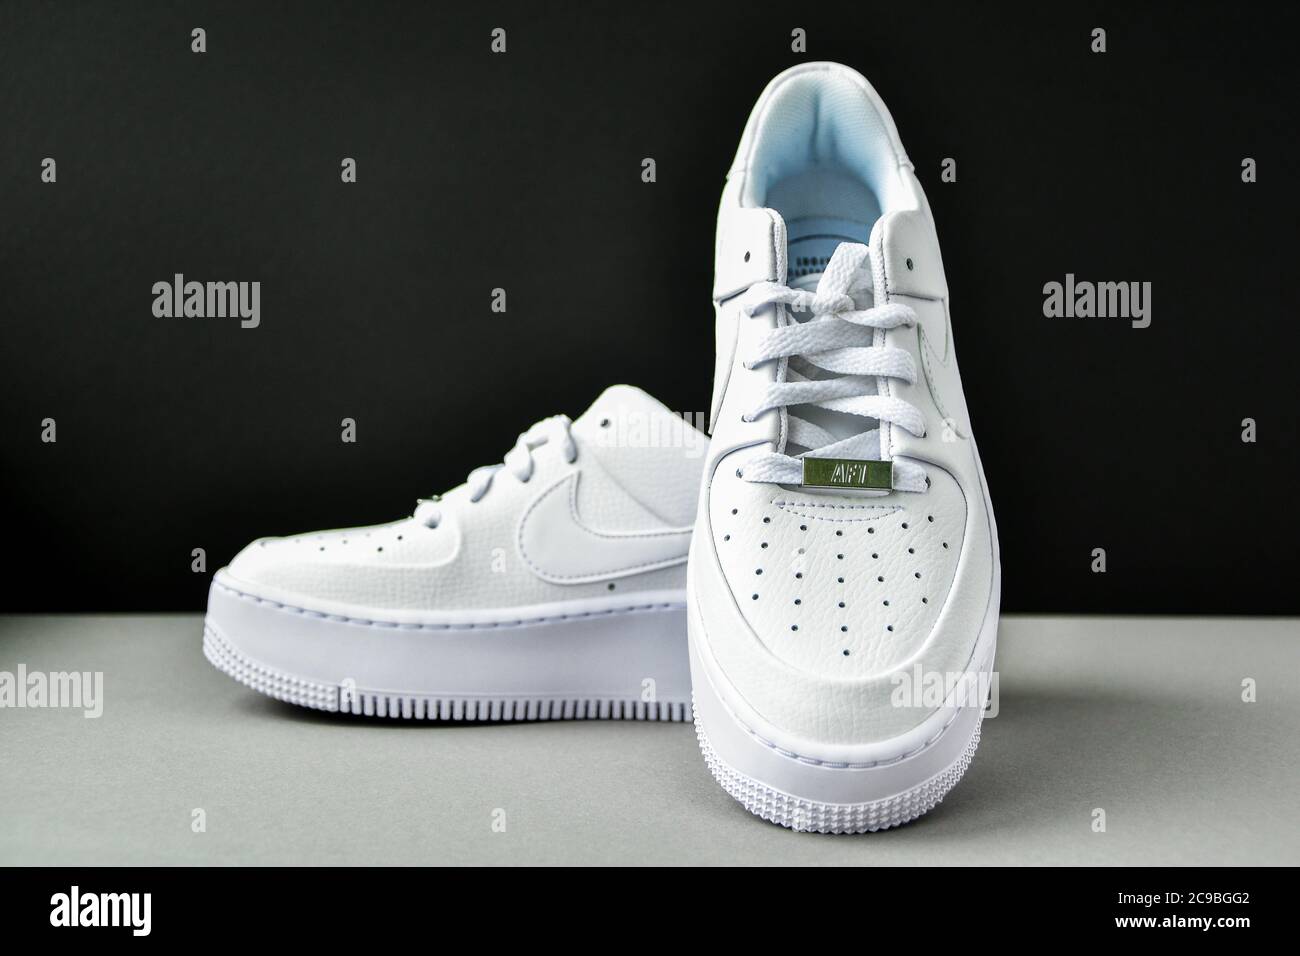 Zhytomyr, Ukraine - June 1, 2020: Nike Air Force 1 Sage white sneakers  product shot on color background. Illustrative editorial photo Stock Photo  - Alamy